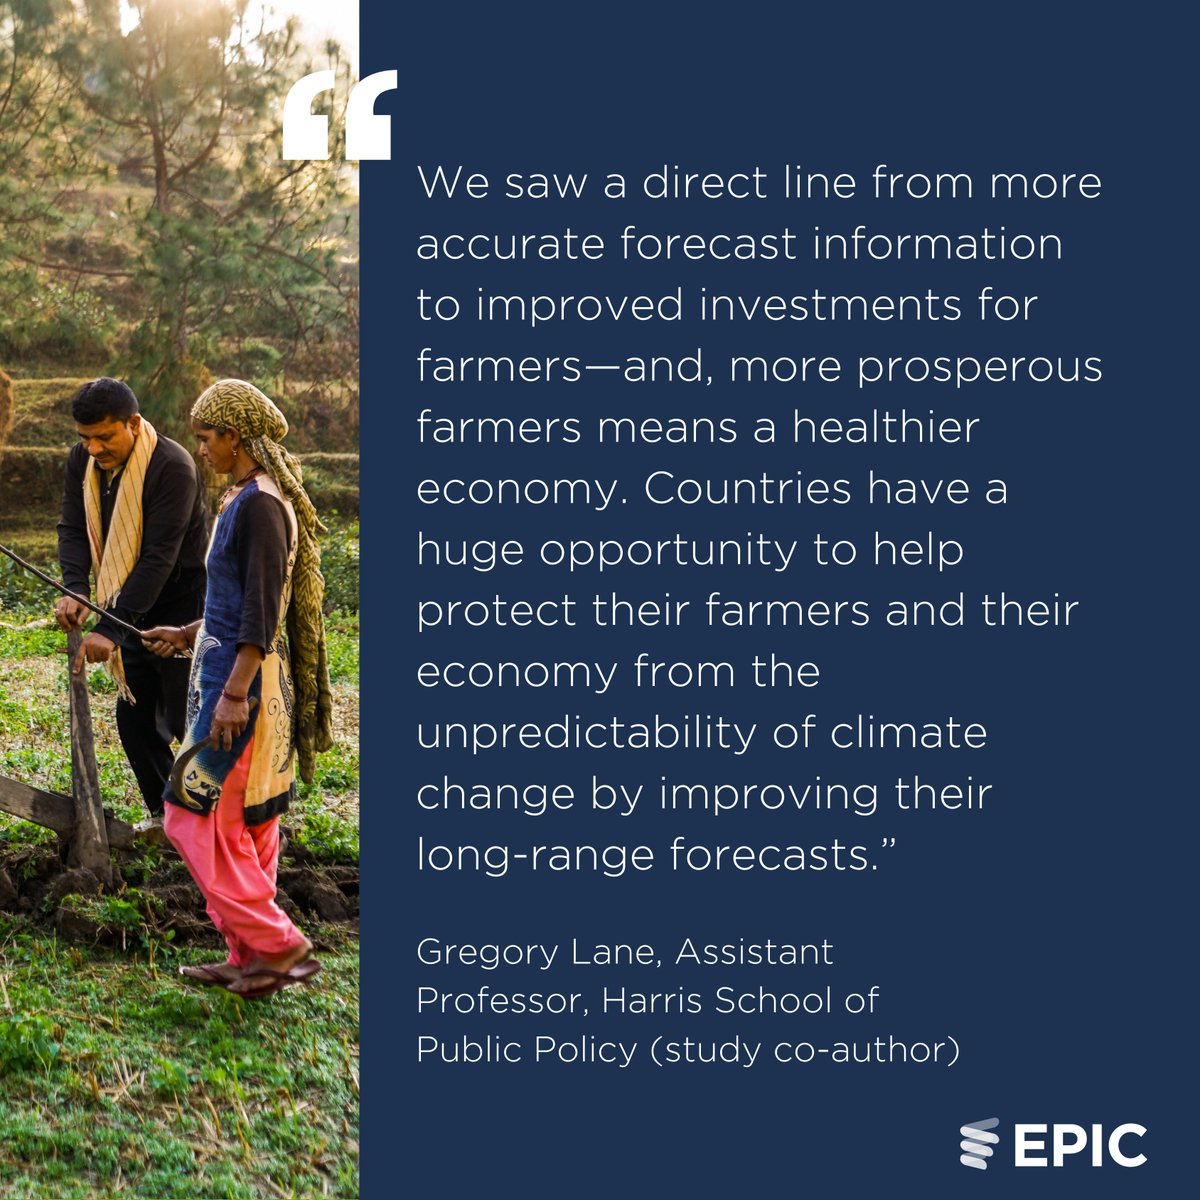 #COP28 identified improved weather forecasts as a key tool to address climate change impacts on food security & ag. New EPIC research put this concept to the test and found accurate weather forecasts can help farmers decide how much to plant or whether to plant at all.🧵 1/5